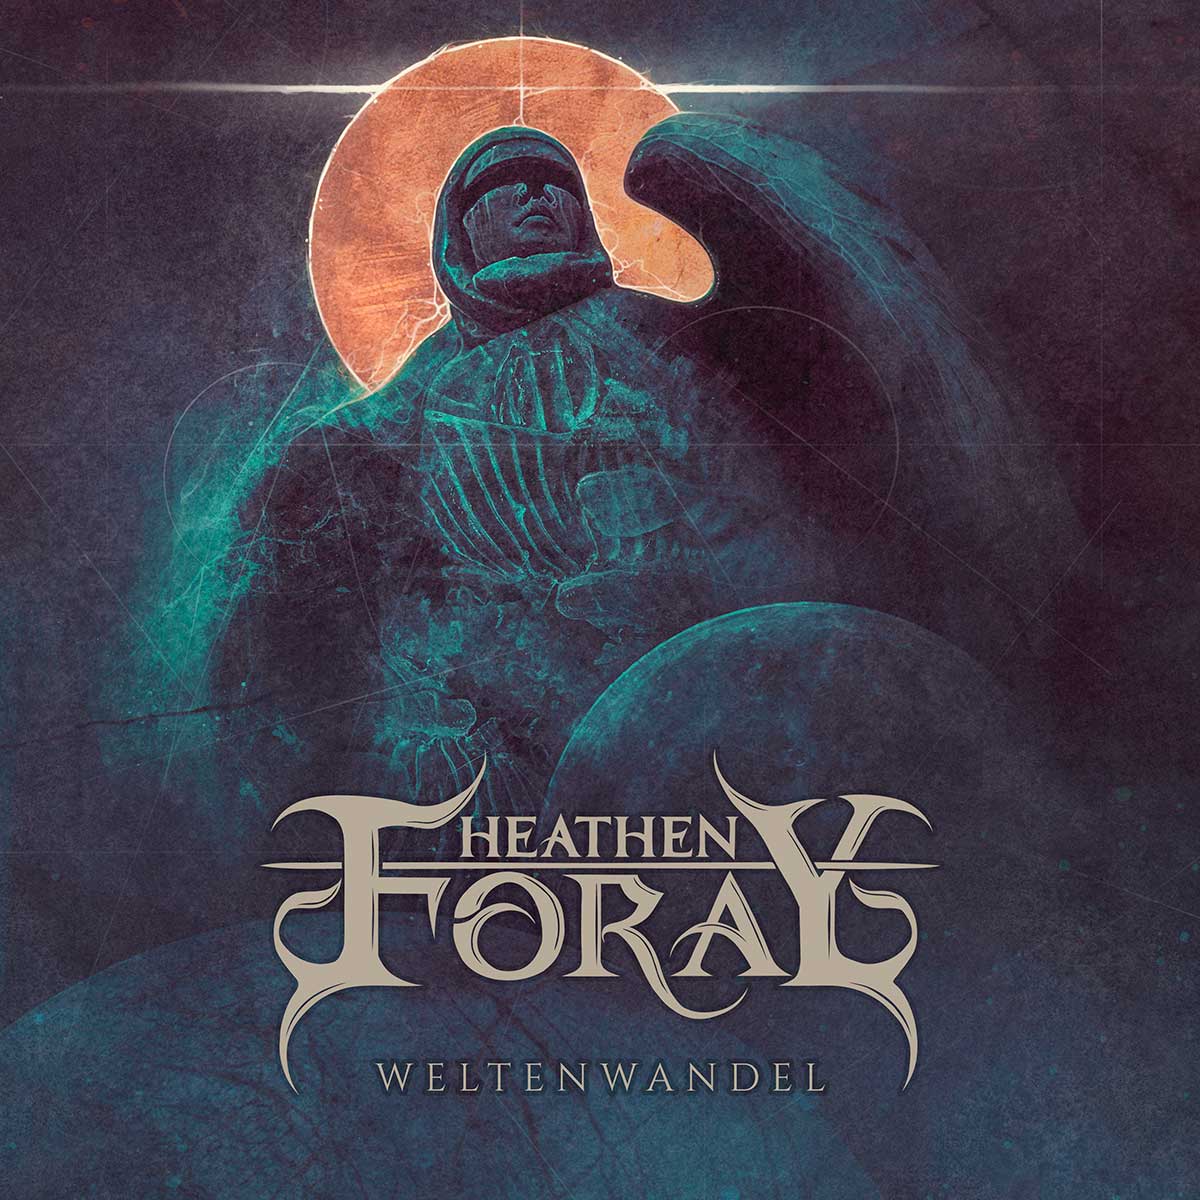 Cover of Weltenwandel by Heathen Foray